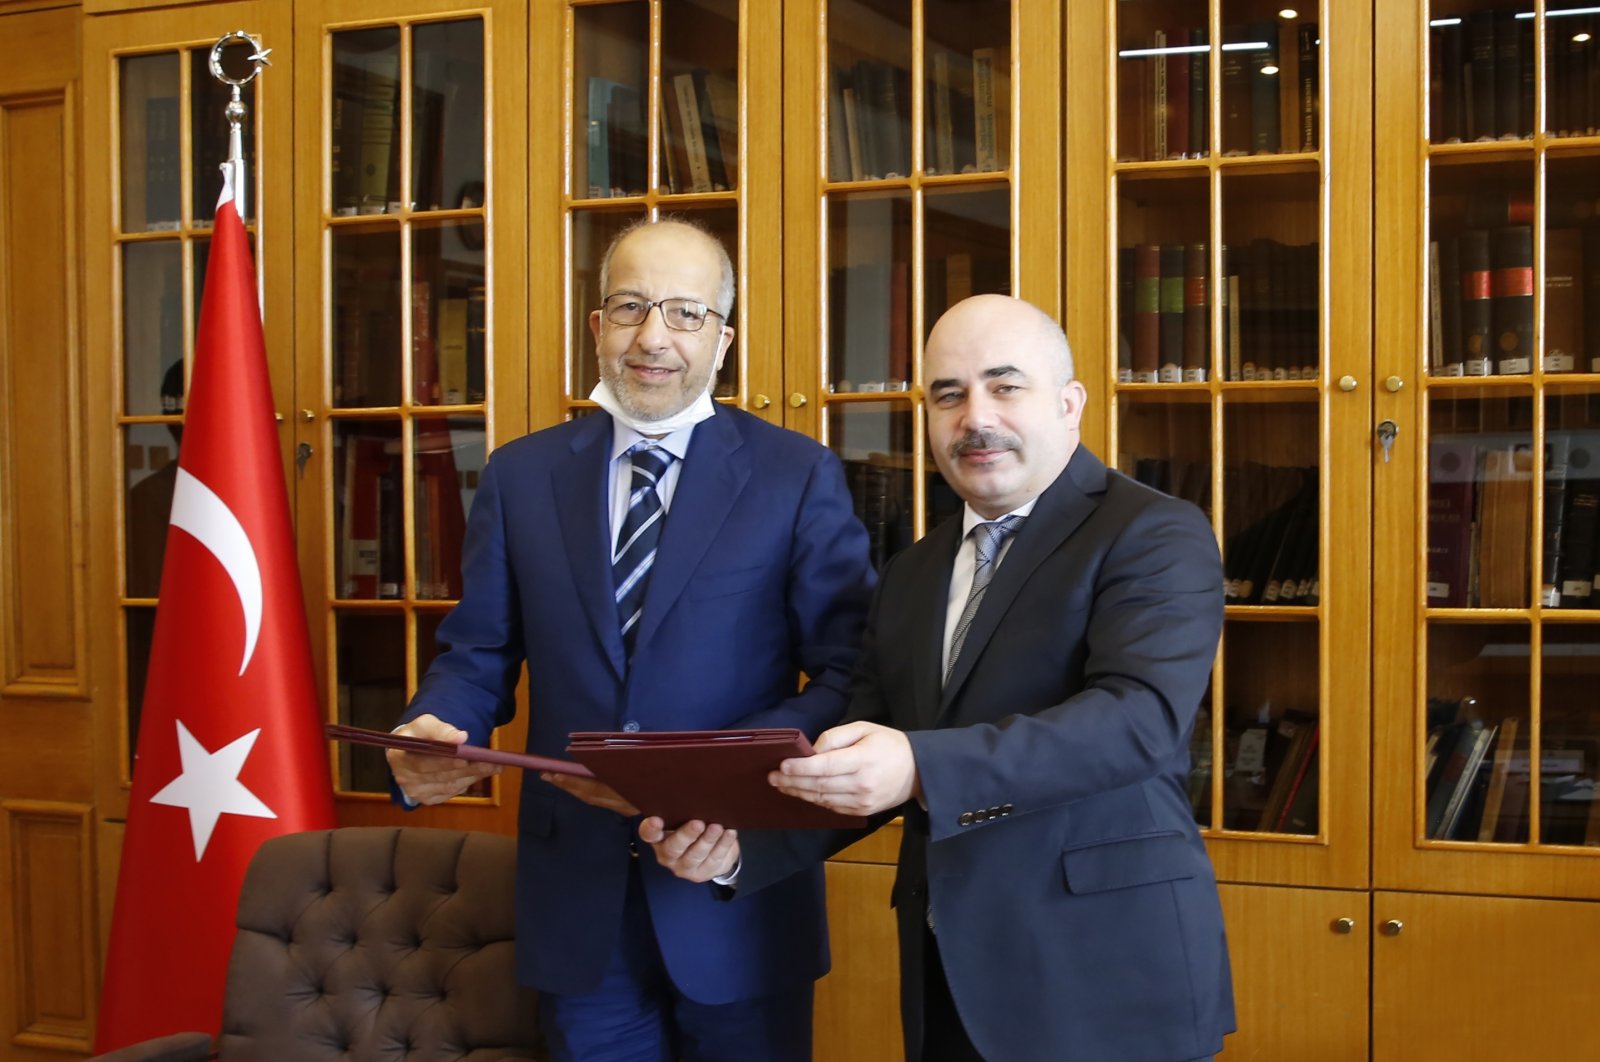 Murat Uysal (R), governor of the Central Bank of the Republic of Turkey, poses with his Libyan counterpart Saddek Elkaber (L) after the signing of the memorandum, Aug. 31, 2020. (Retrieved from Twitter)